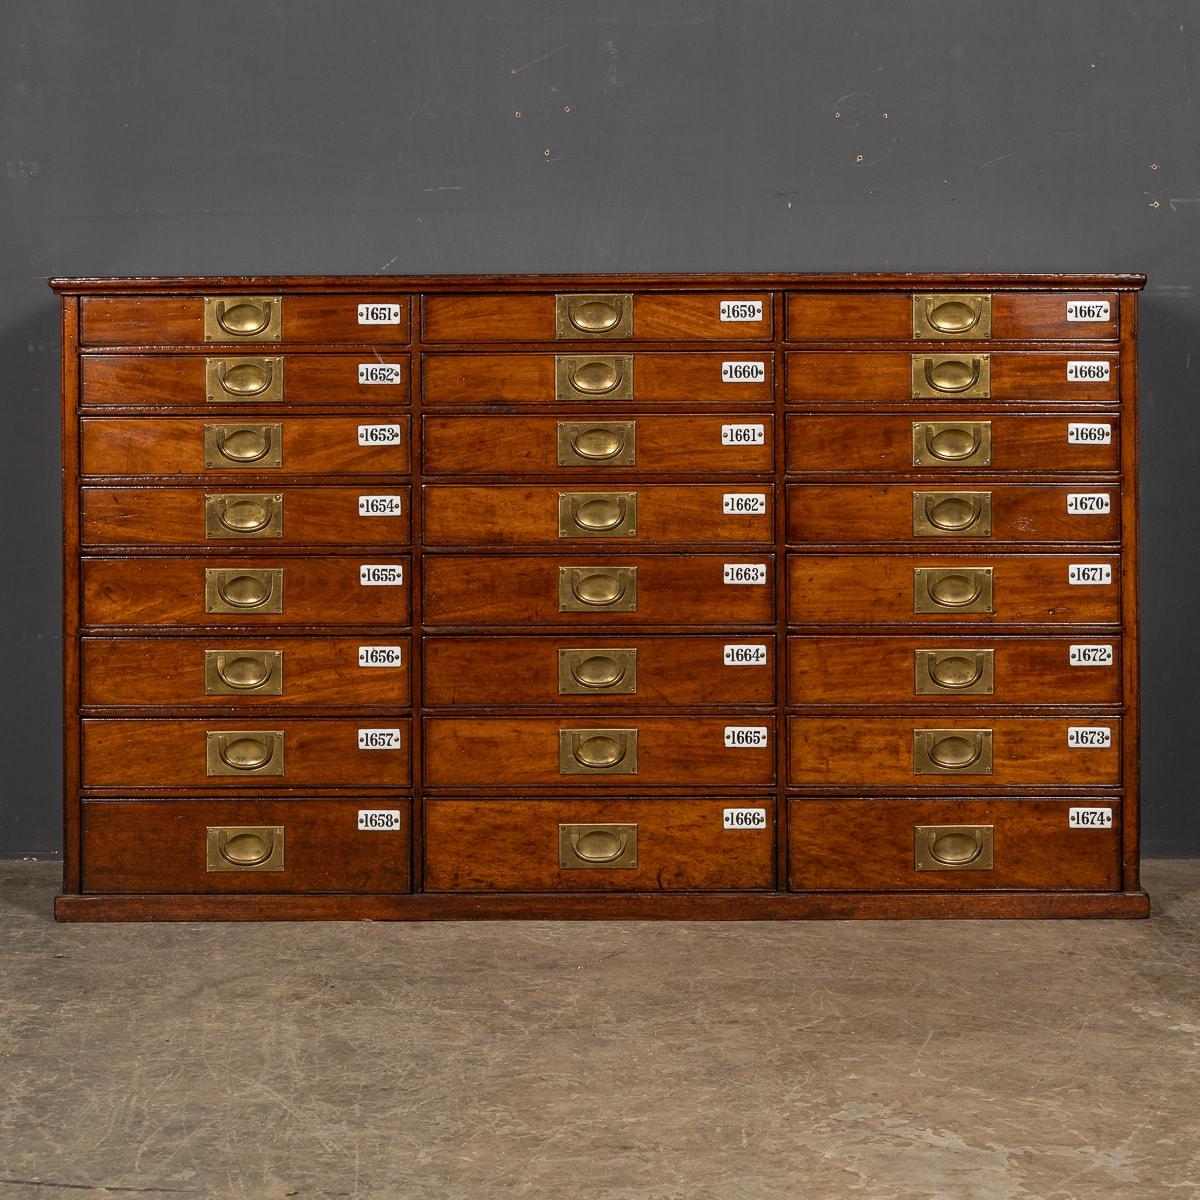 Antique late-19th Century Victorian mahogany bank drawers, this piece has 24 retractable drawers with original brass campaign handles and enamelled labels.

CONDITION
In Great Condition - wear as expected.

SIZE
Height: 80cm
Depth: 134cm
Depth: 34cm